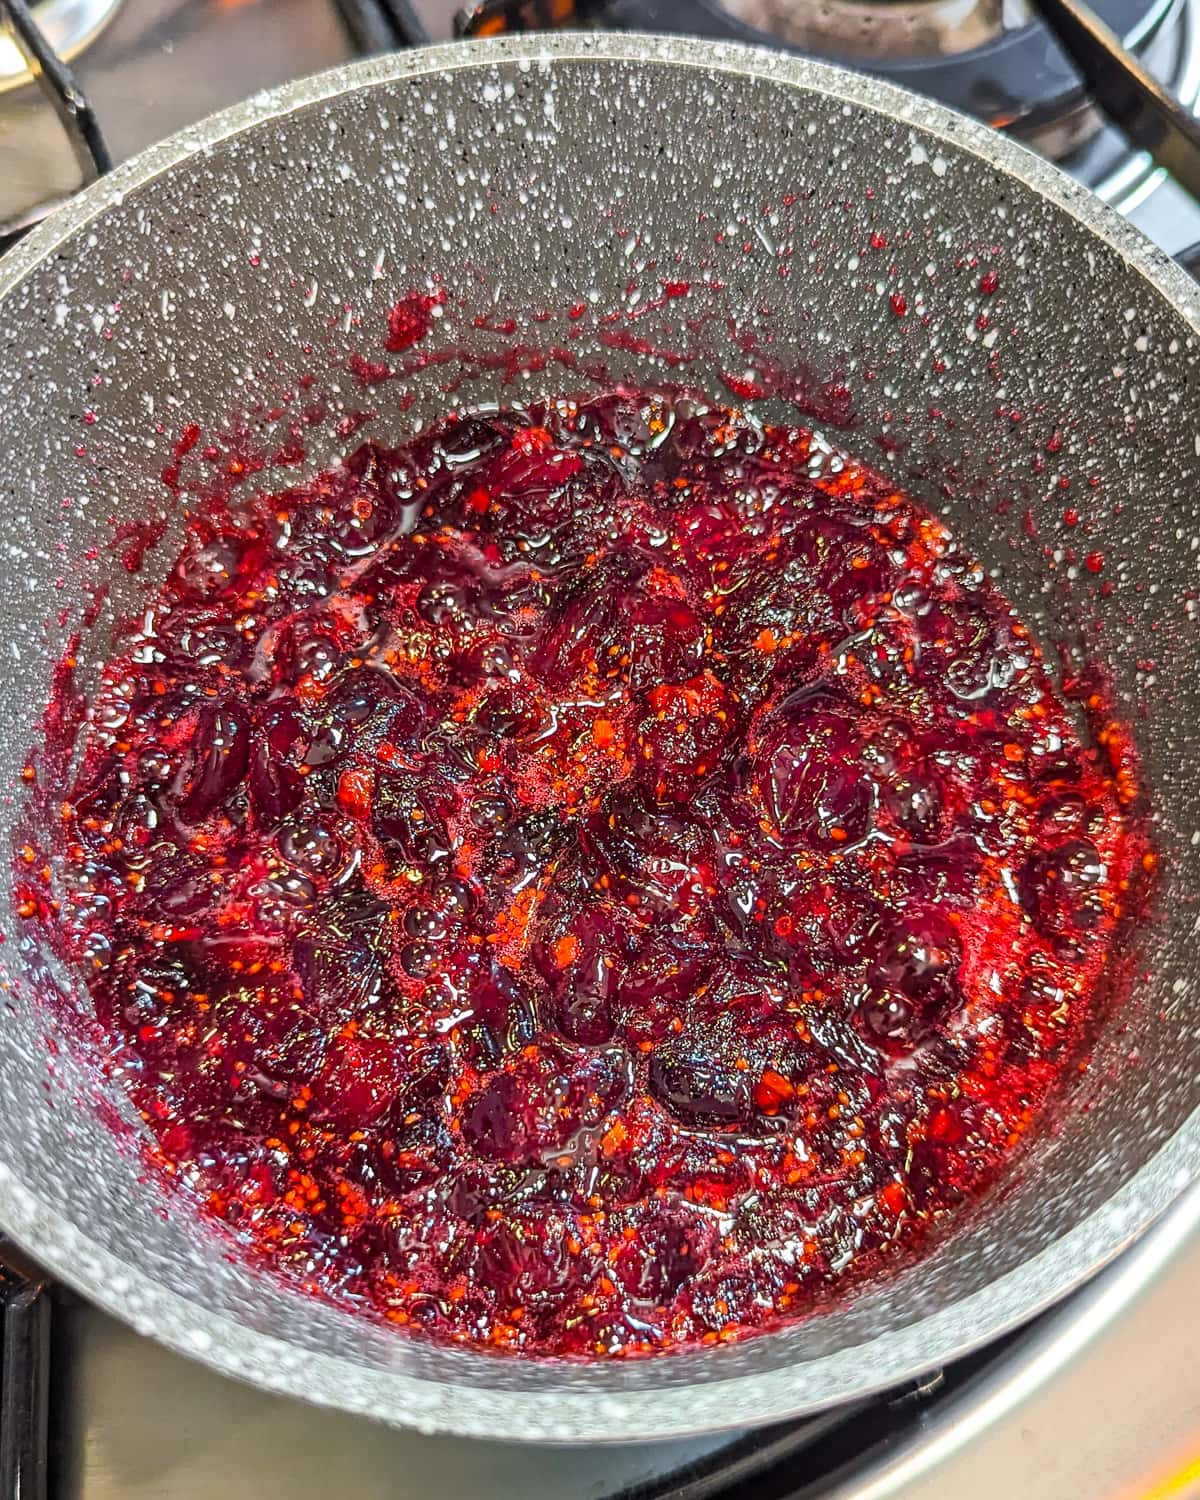 Christmas jam of cranberries boiling in a pan on the stove.